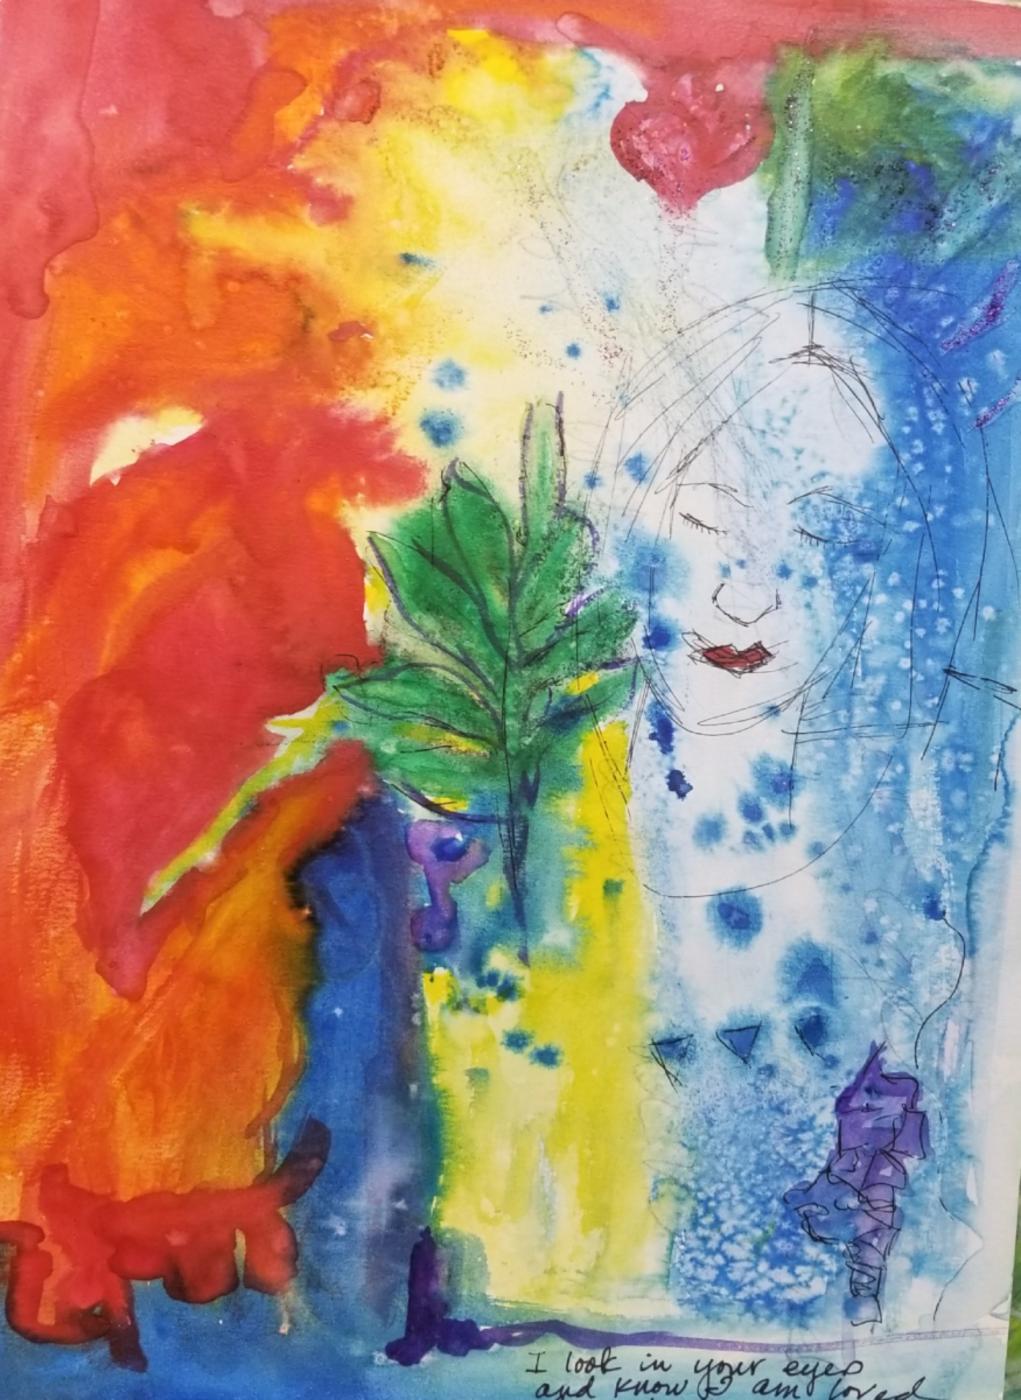 This piece is predominantly watercolor with areas of ink. The left area of the painting is red and orange melding together, the center yellow and the right side blue. There is a ti leaf plant in the center of the painting which offers protection. There is a female face off with downcast eyes to the right of center drawn in ink and at the bottom of the page the words are written in ink. “I look in her eyes and I know I am loved”.